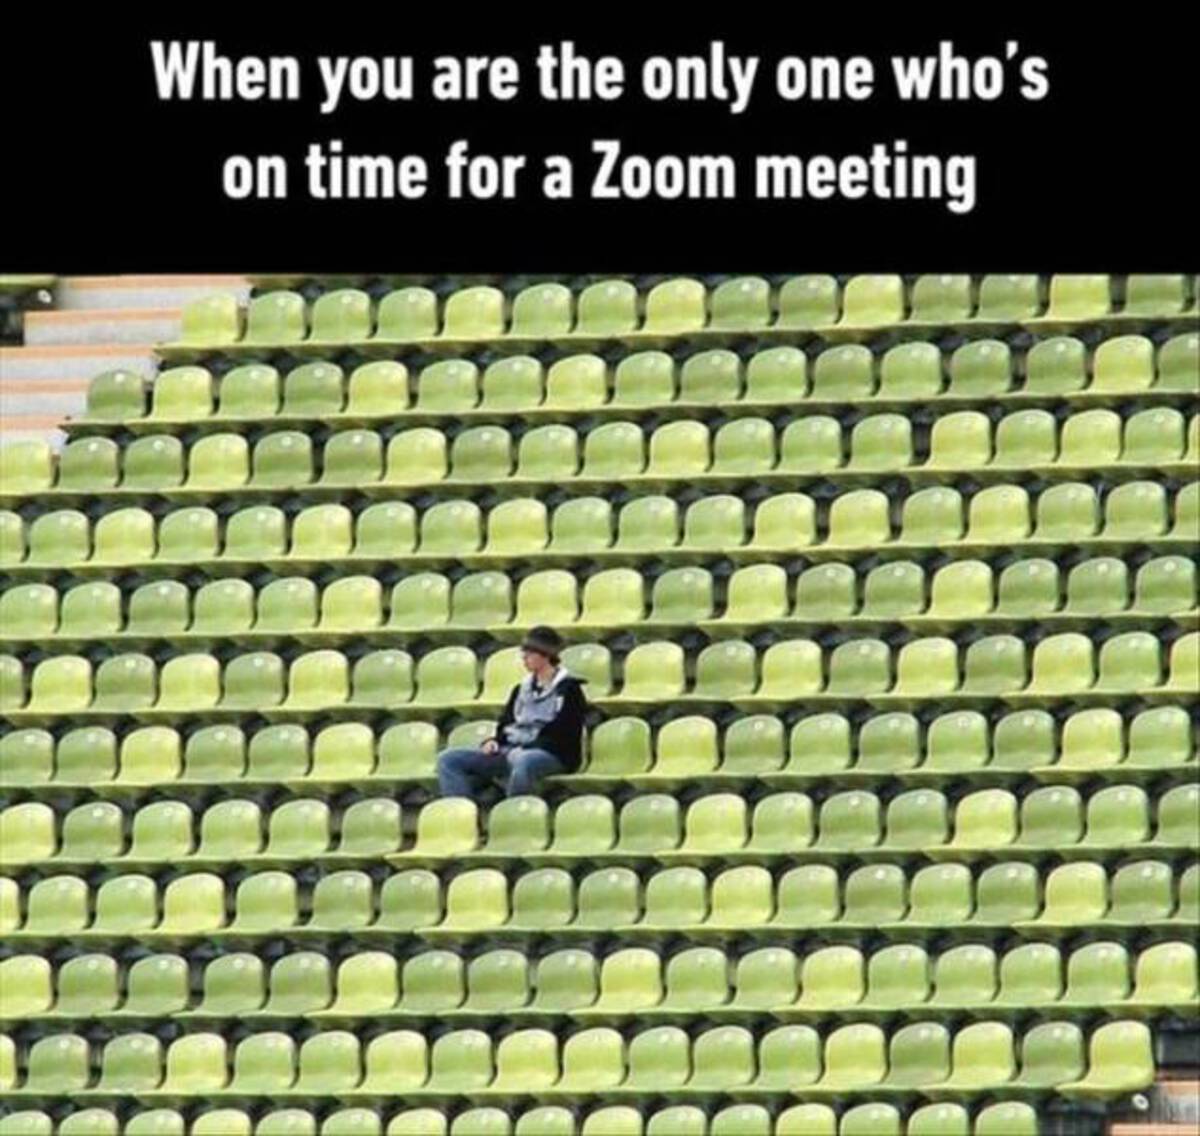 support congrats - When you are the only one who's on time for a Zoom meeting